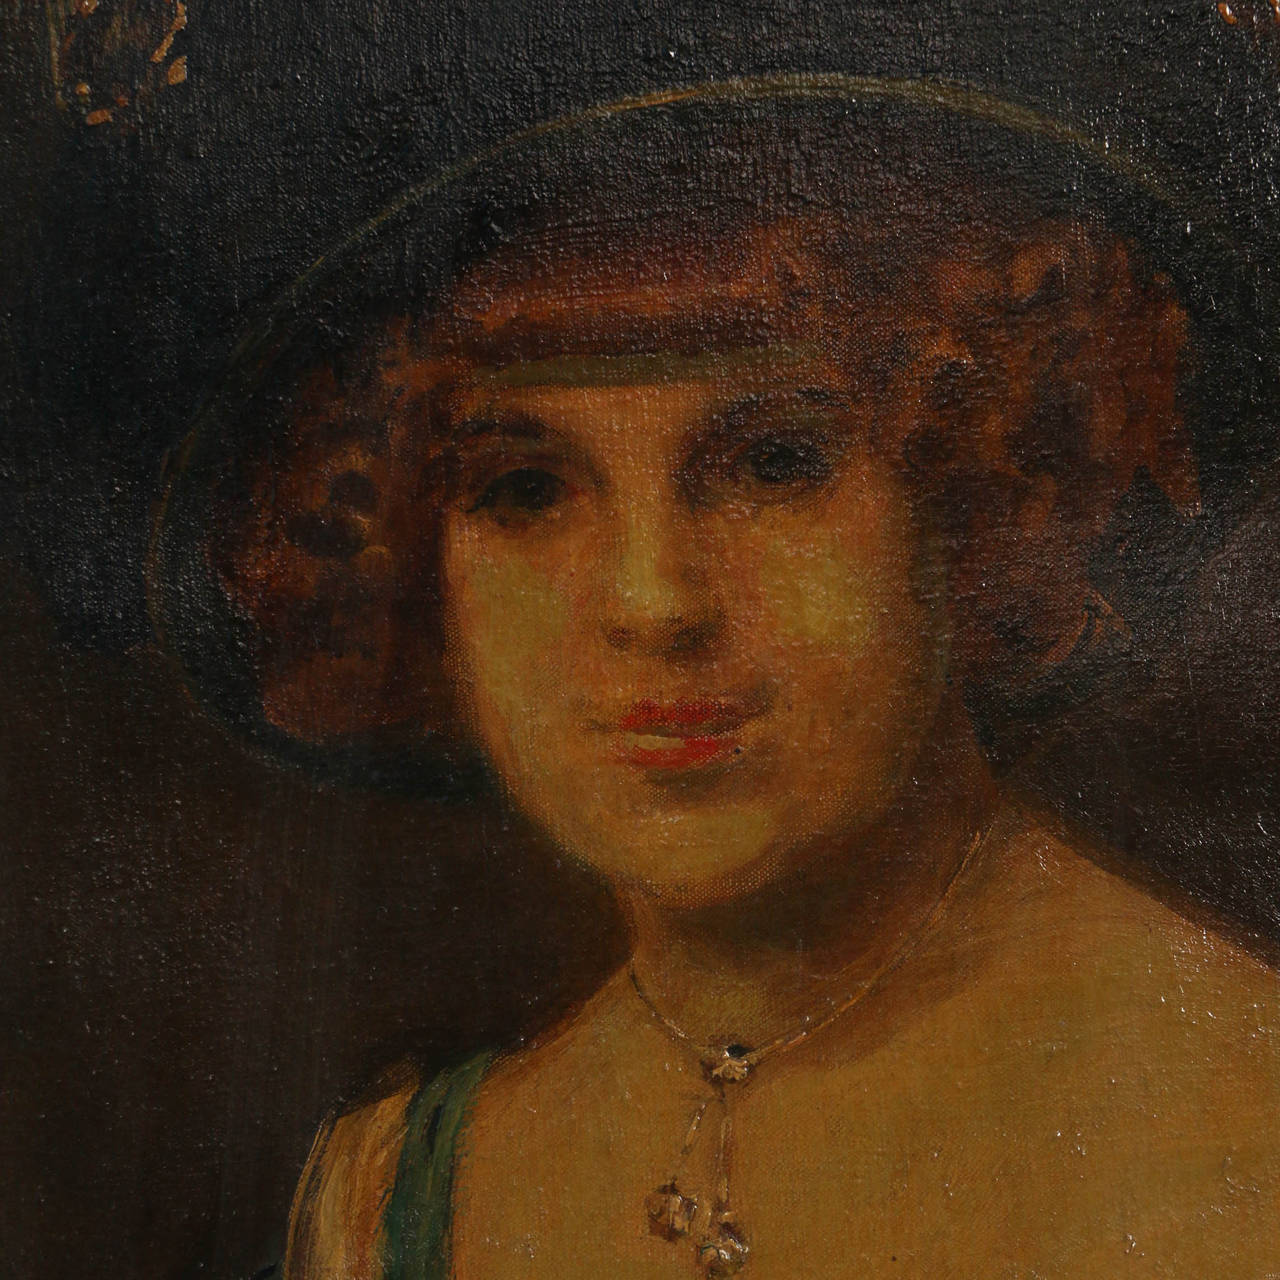 Original oil on canvas portrait of the singer and Danish Painter Holger Drachmann's lover and muse, Amanda Jensine Nielsen. She is wearing a lovely blue dress and hat, with a delicate necklace around her neck. Signed A. Weie on the reverse.